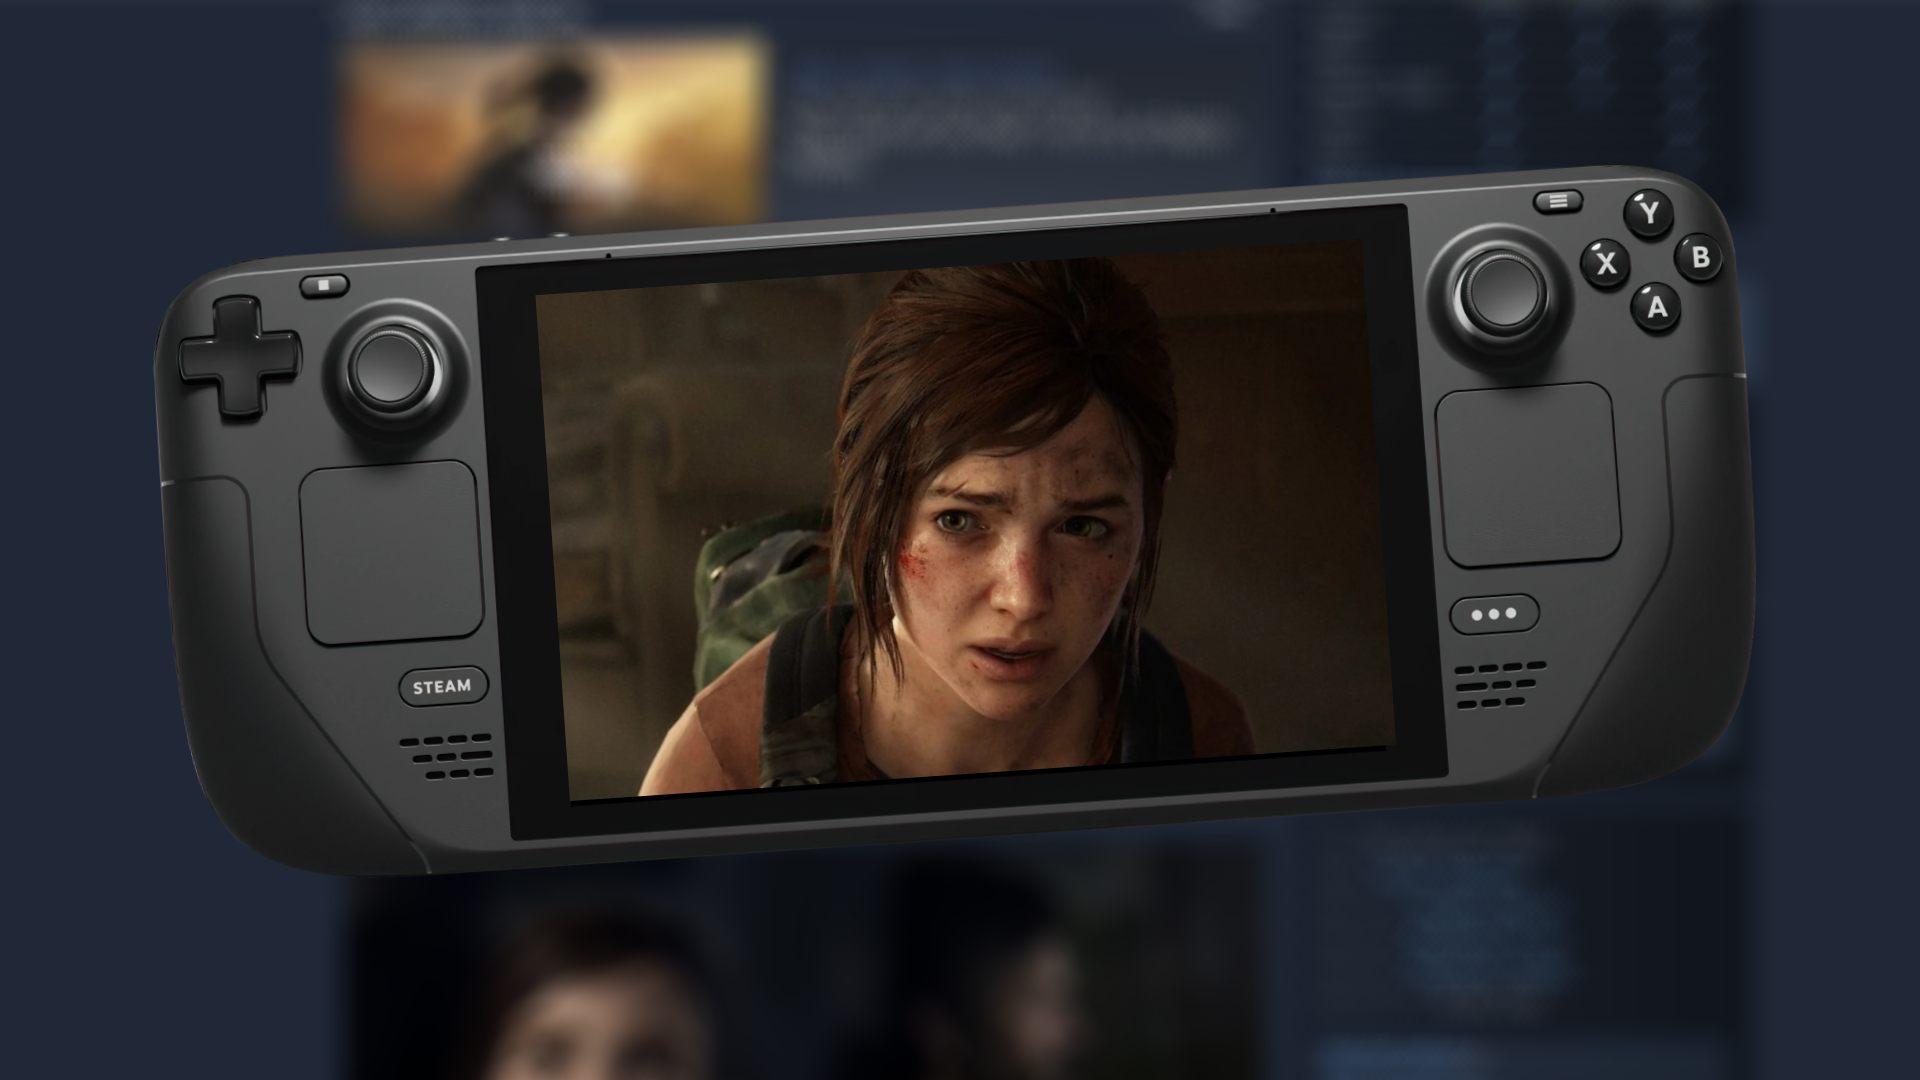 The Last of Us will Also be Available on Steam Deck Along with the